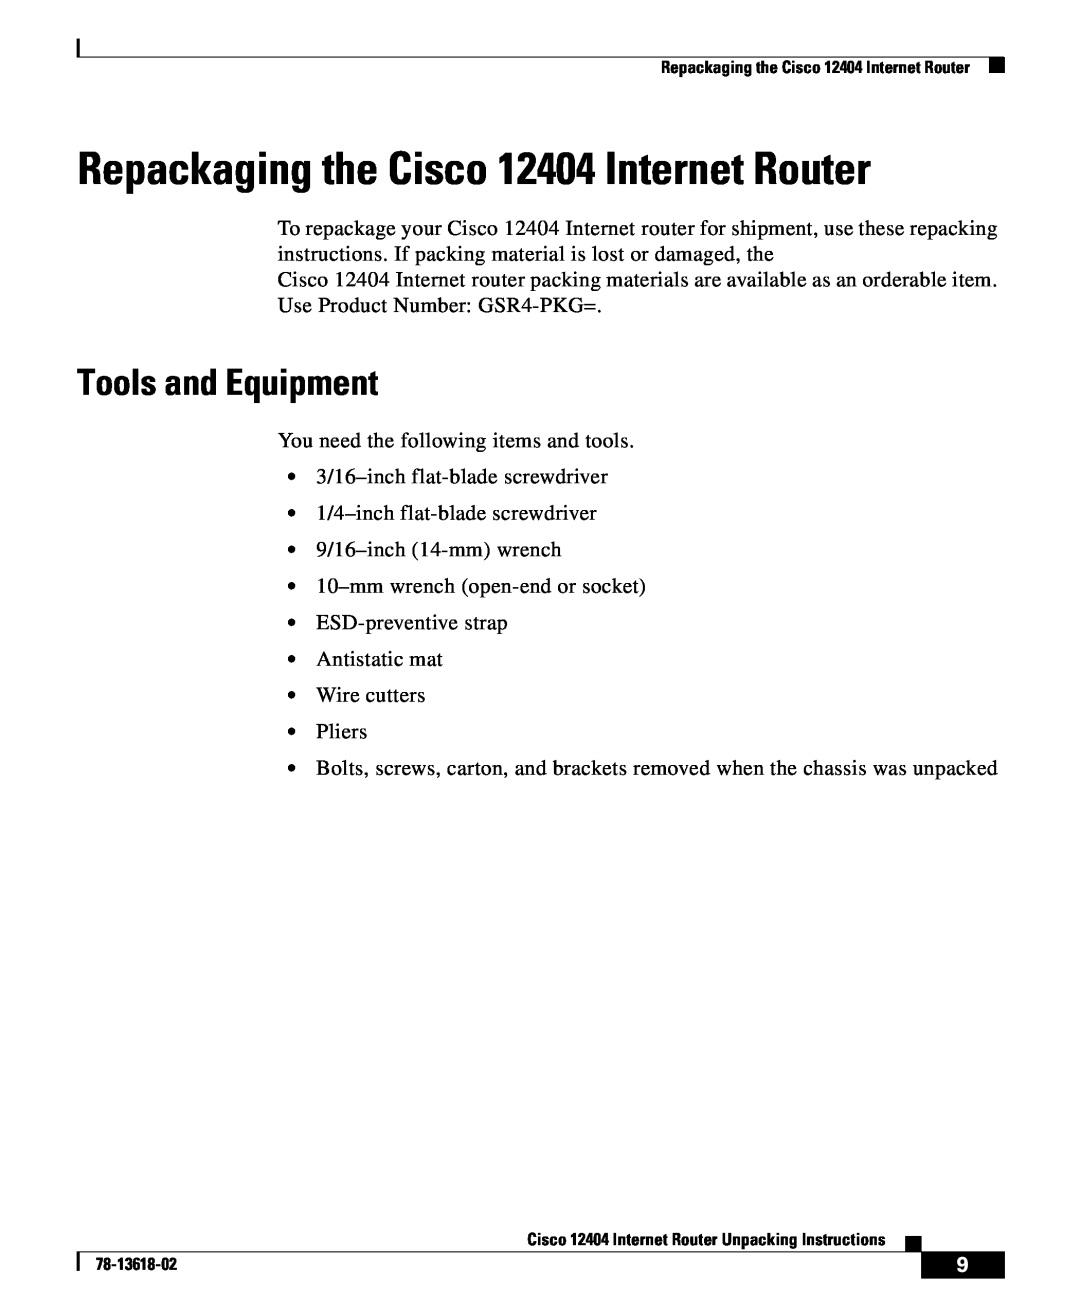 Cisco Systems manual Repackaging the Cisco 12404 Internet Router, Tools and Equipment 